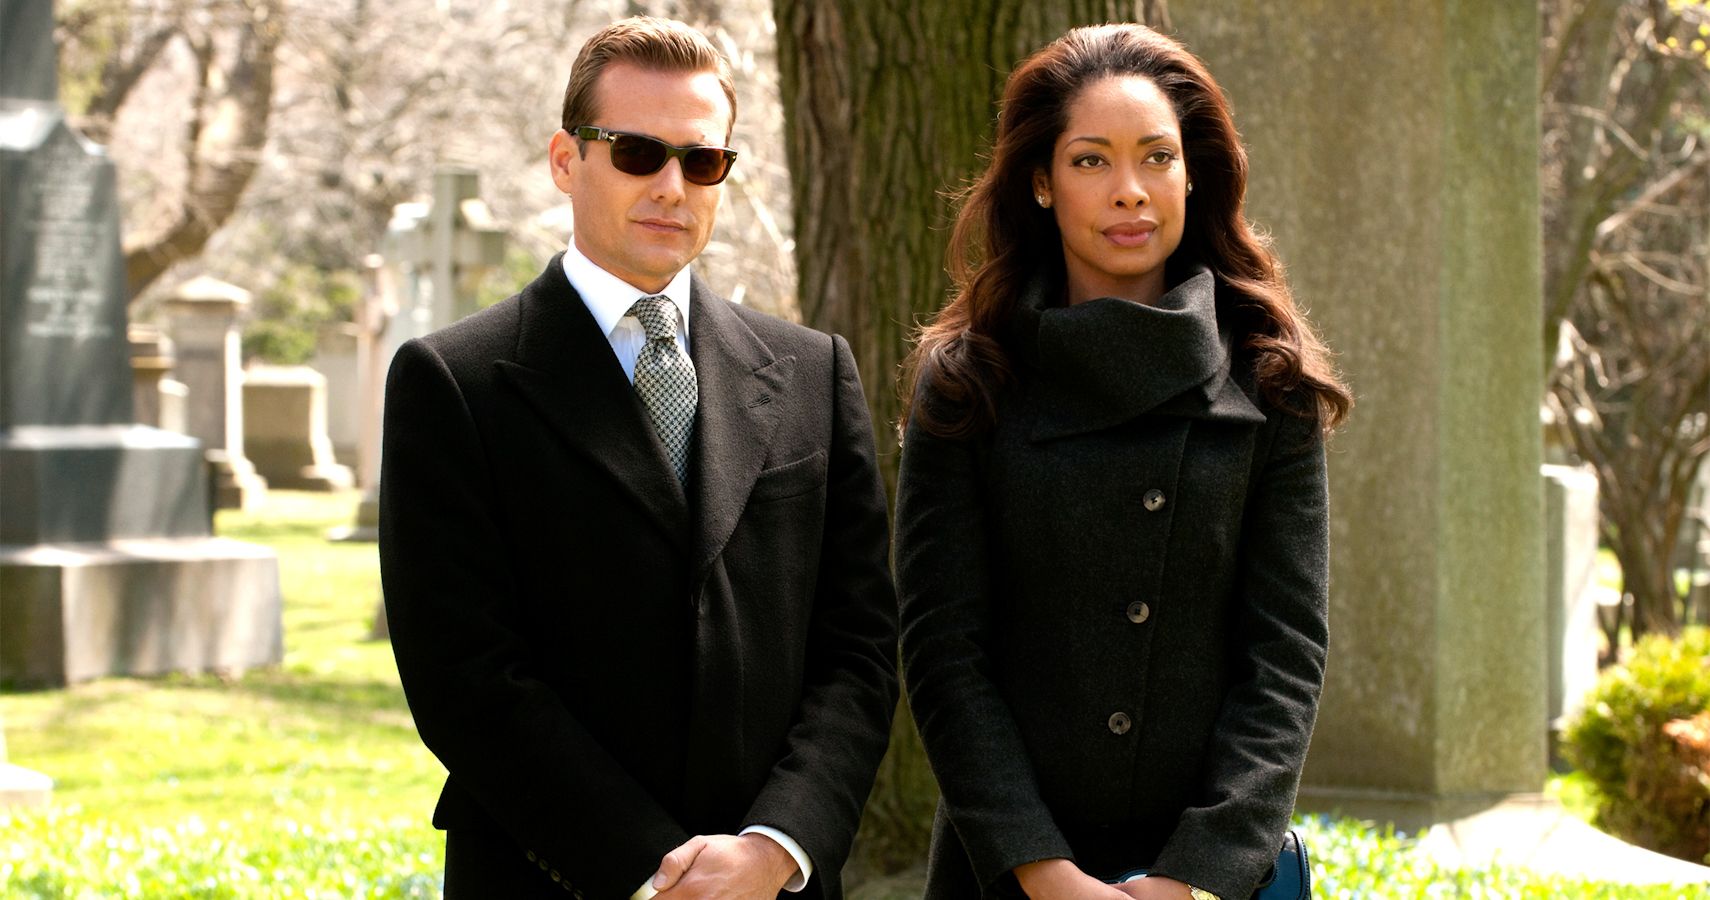 Suits 10 Best Episodes From Season 2 Ranked (According To IMDb)